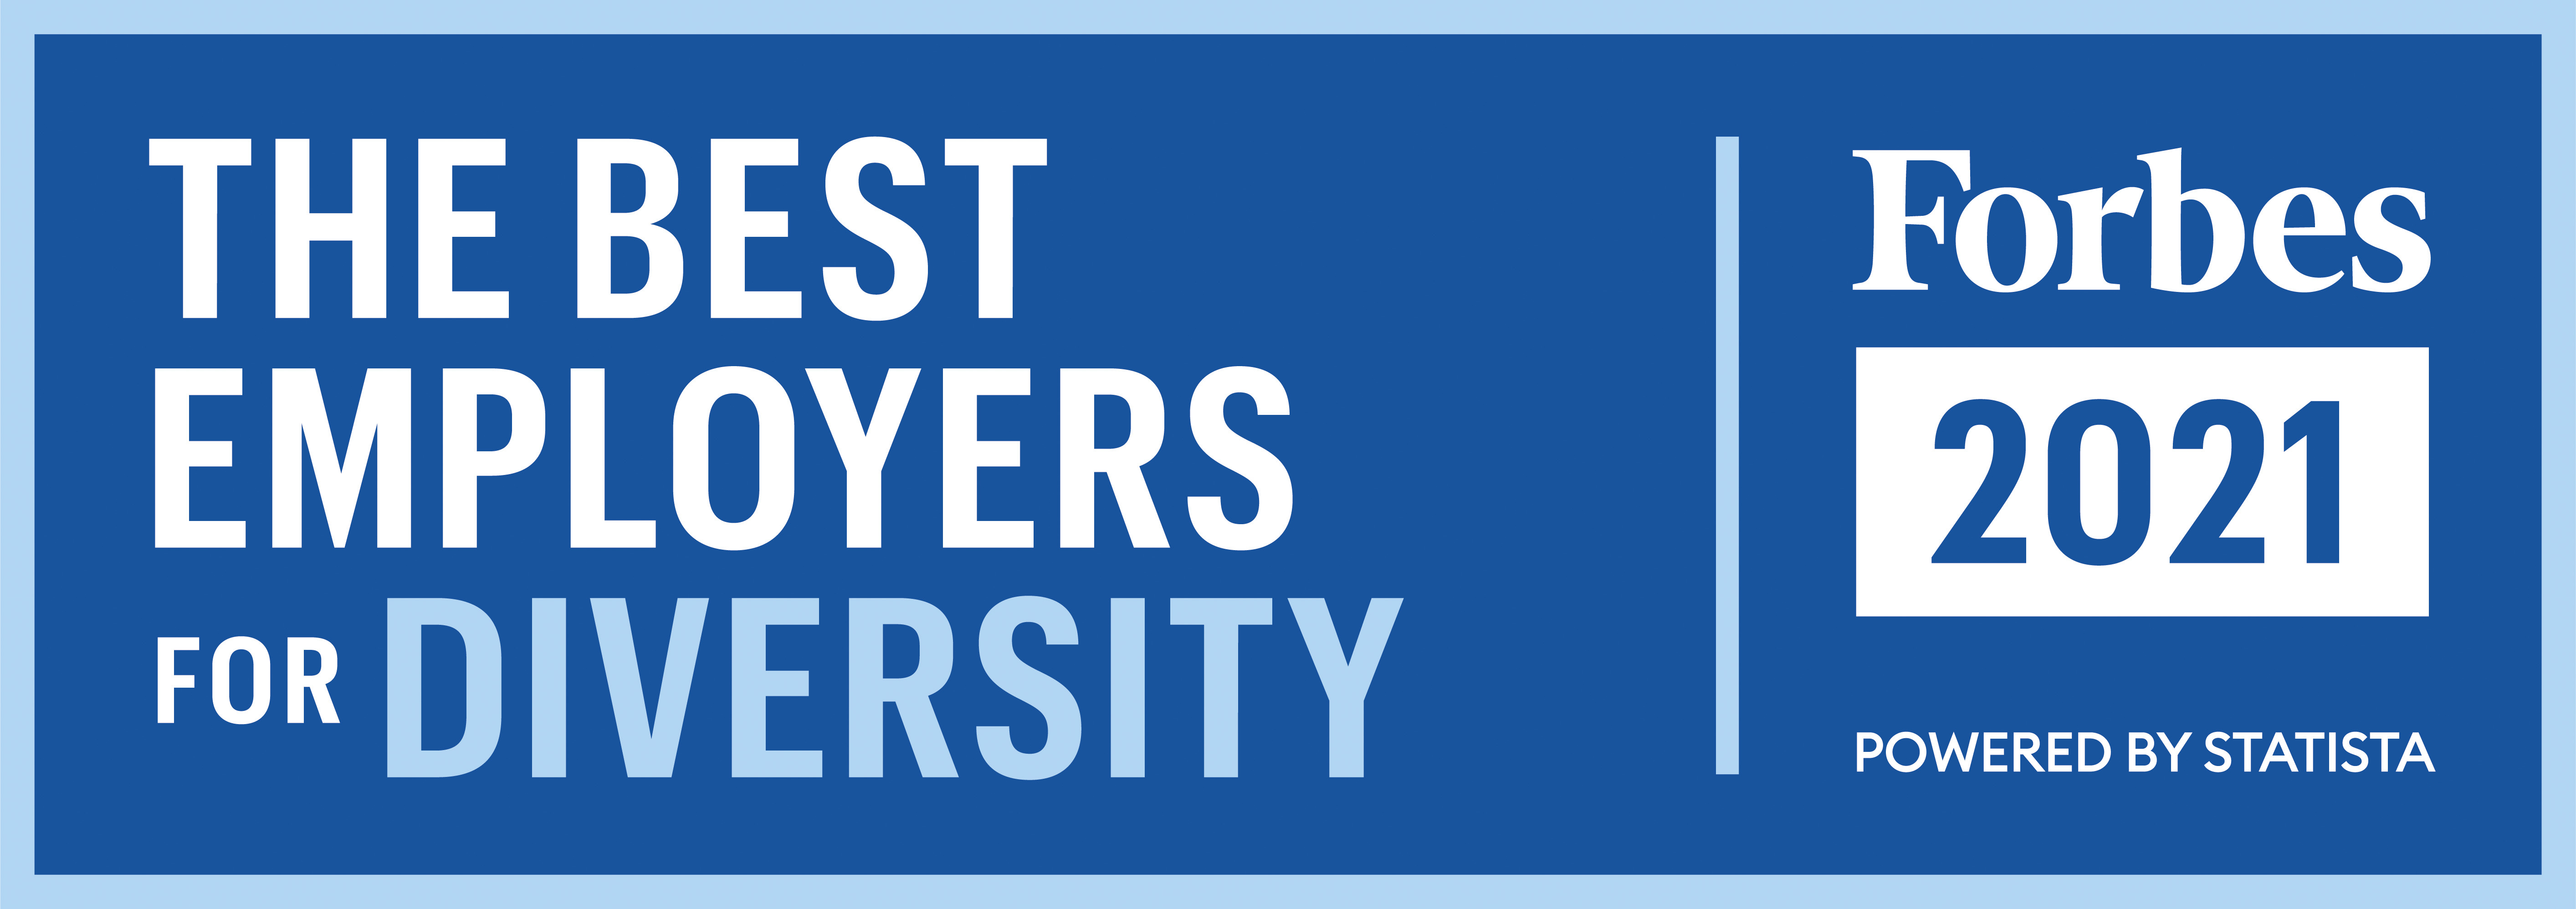 Ryder Named One of America's Best For Diversity 2021 by Forbes | Business Wire